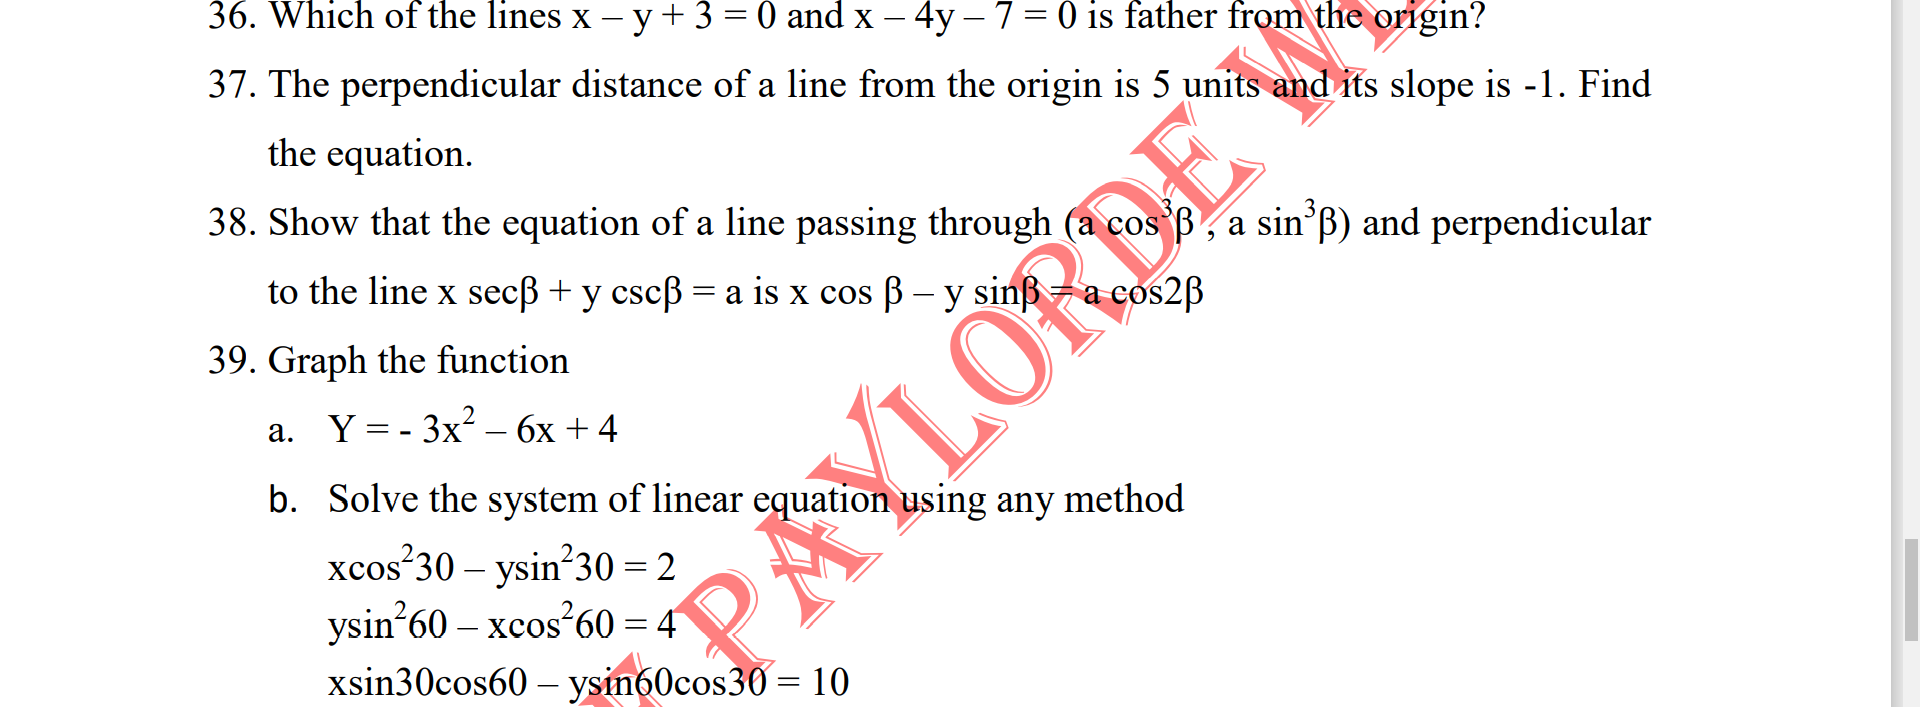 Which of the lines x – y + 3 = 0 and x – 4y –7= 0 is father from the origin?
-
